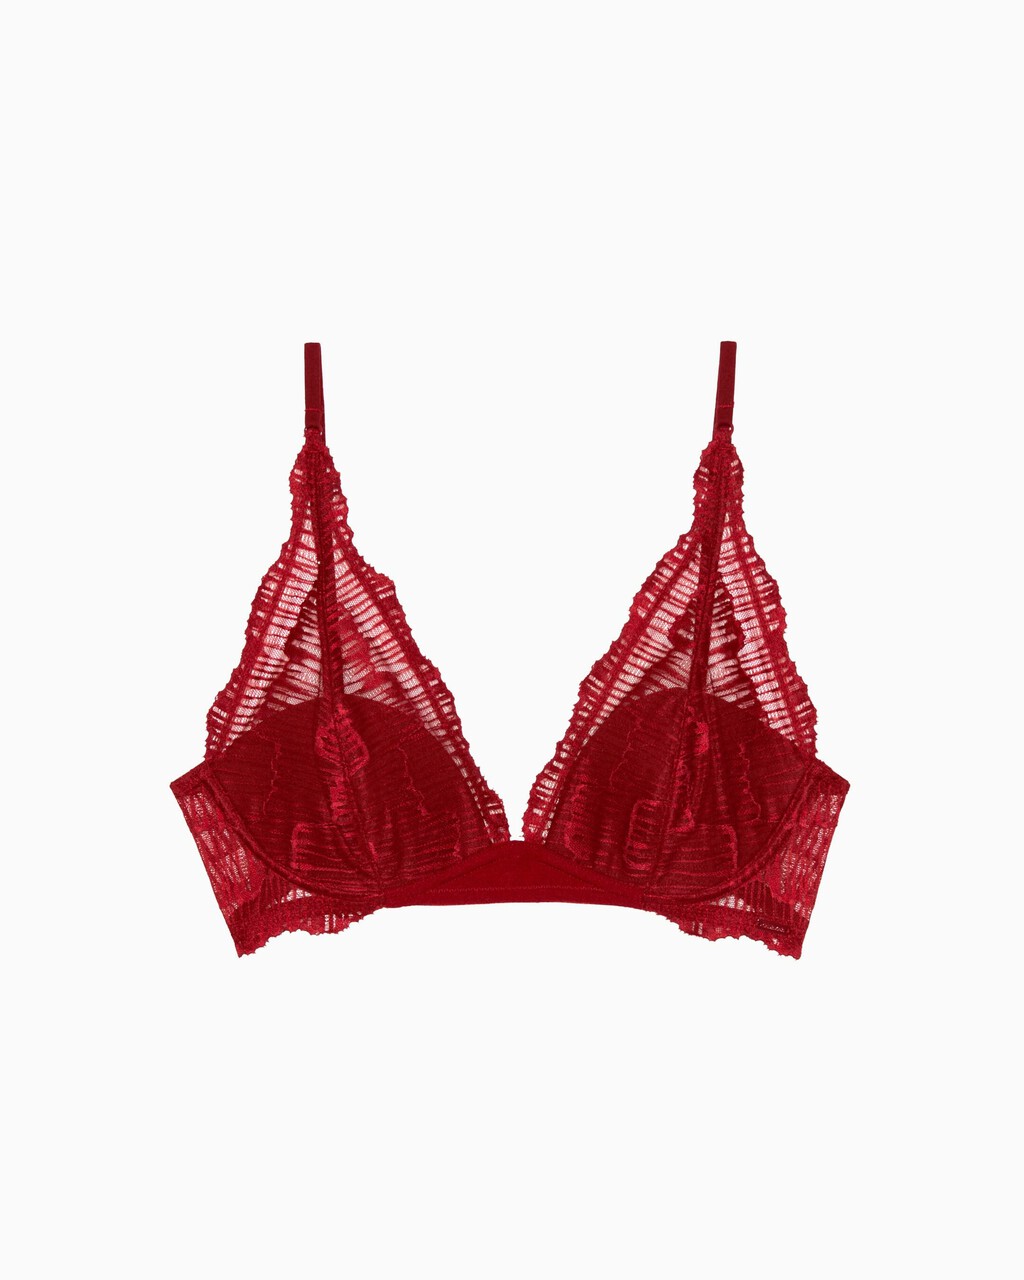 CK Black Linear Lace Lightly Lined Triangle Bra, red